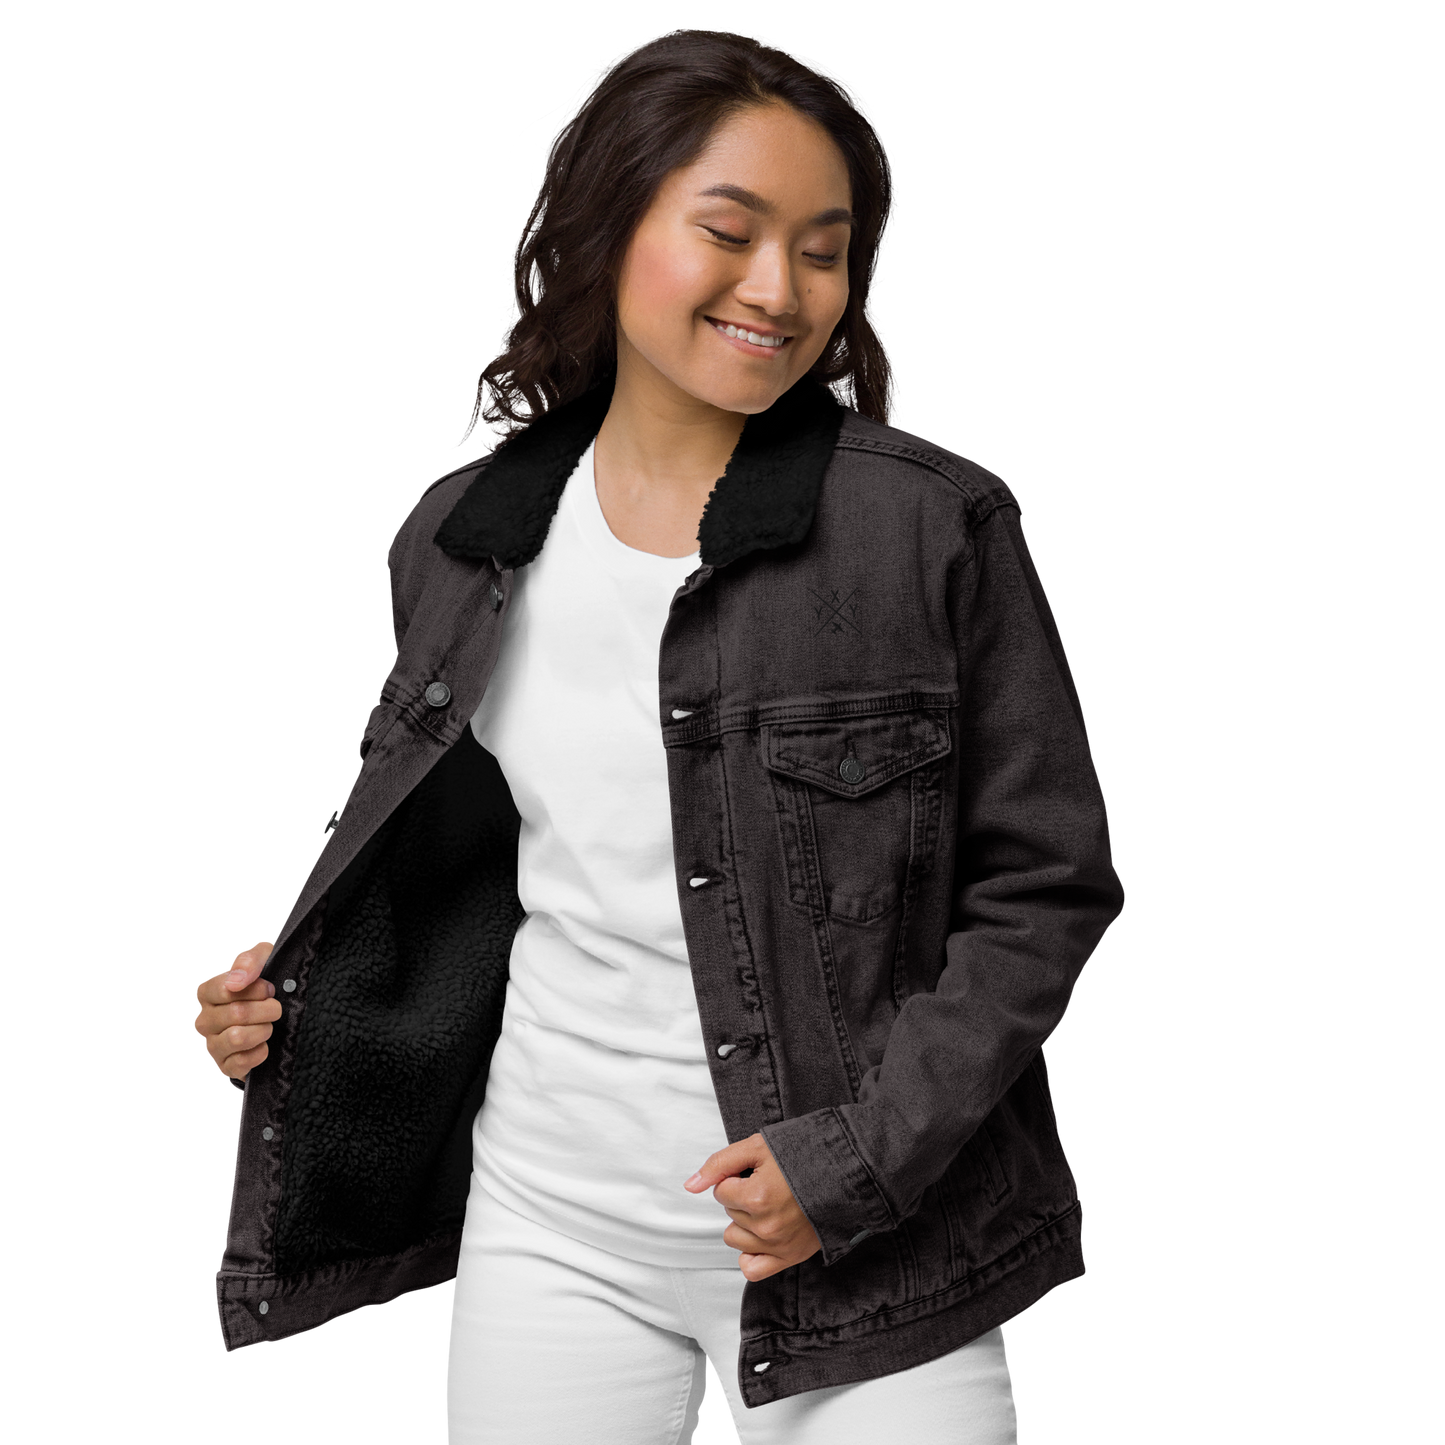 YHM Designs - YXY Whitehorse Denim Sherpa Jacket - Crossed-X Design with Airport Code and Vintage Propliner - Black & White Embroidery - Image 05